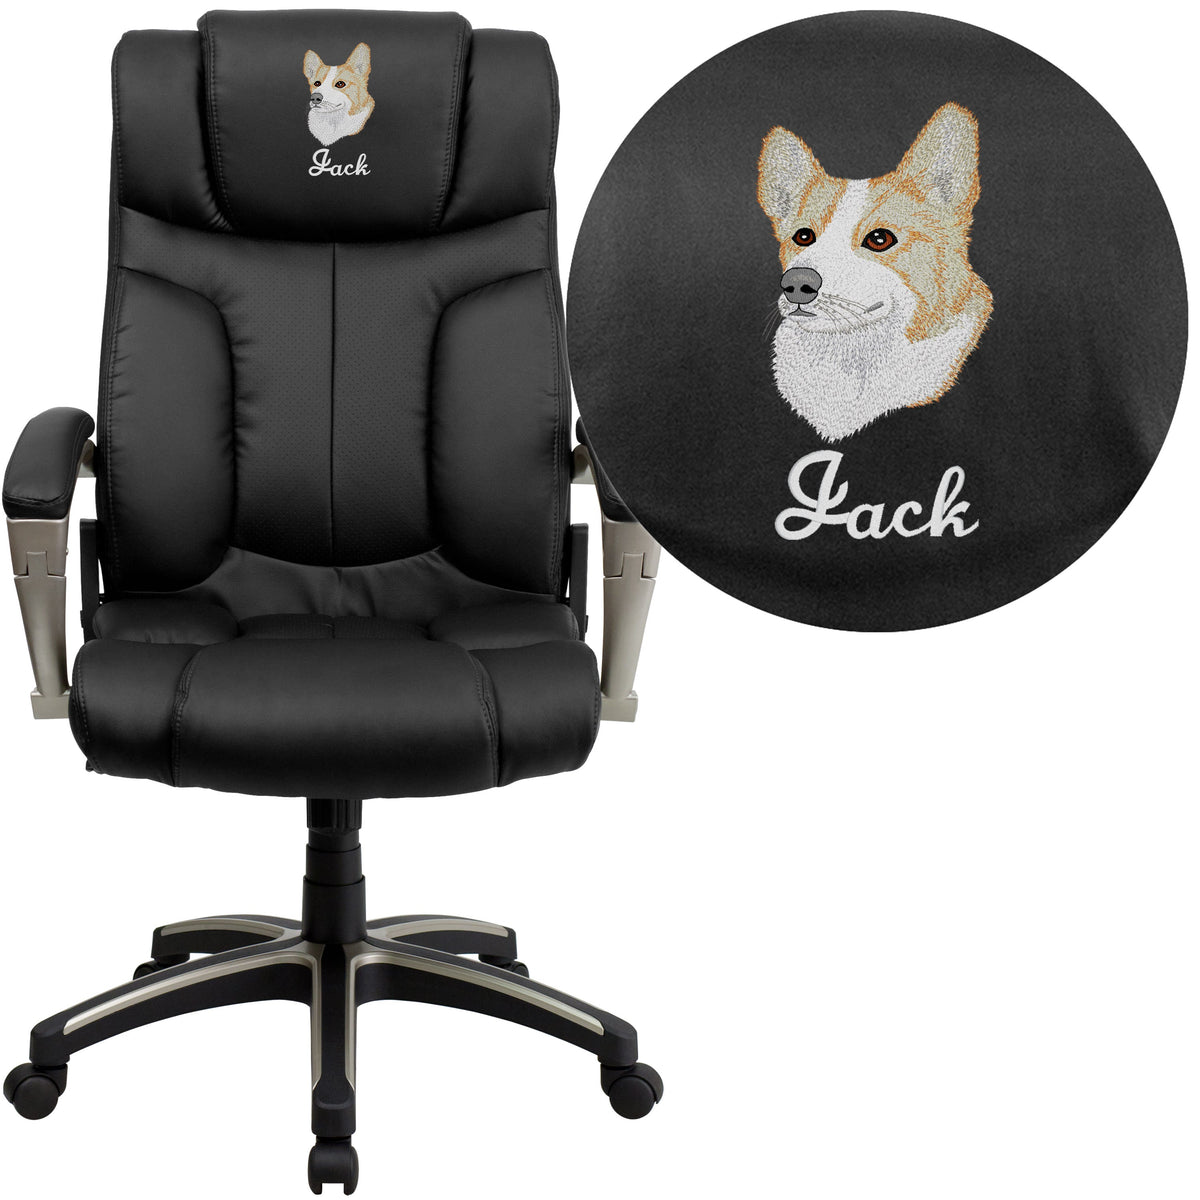 Embroidered High Back Folding Black LeatherSoft Executive Swivel Office Chair